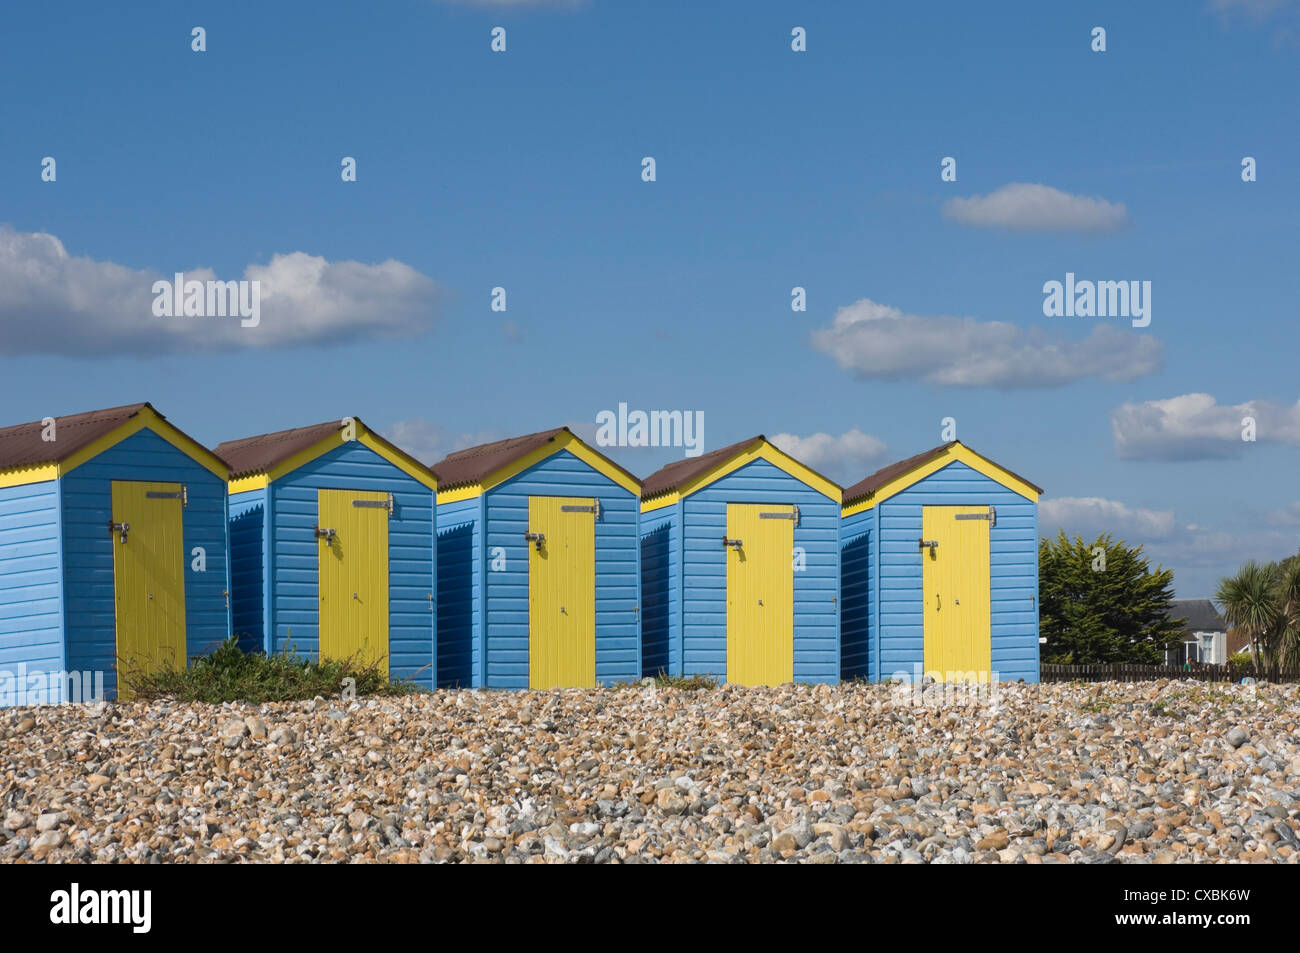 Five blue beach huts with yellow doors, Littlehampton, West Sussex, England, United Kingdom, Europe Stock Photo